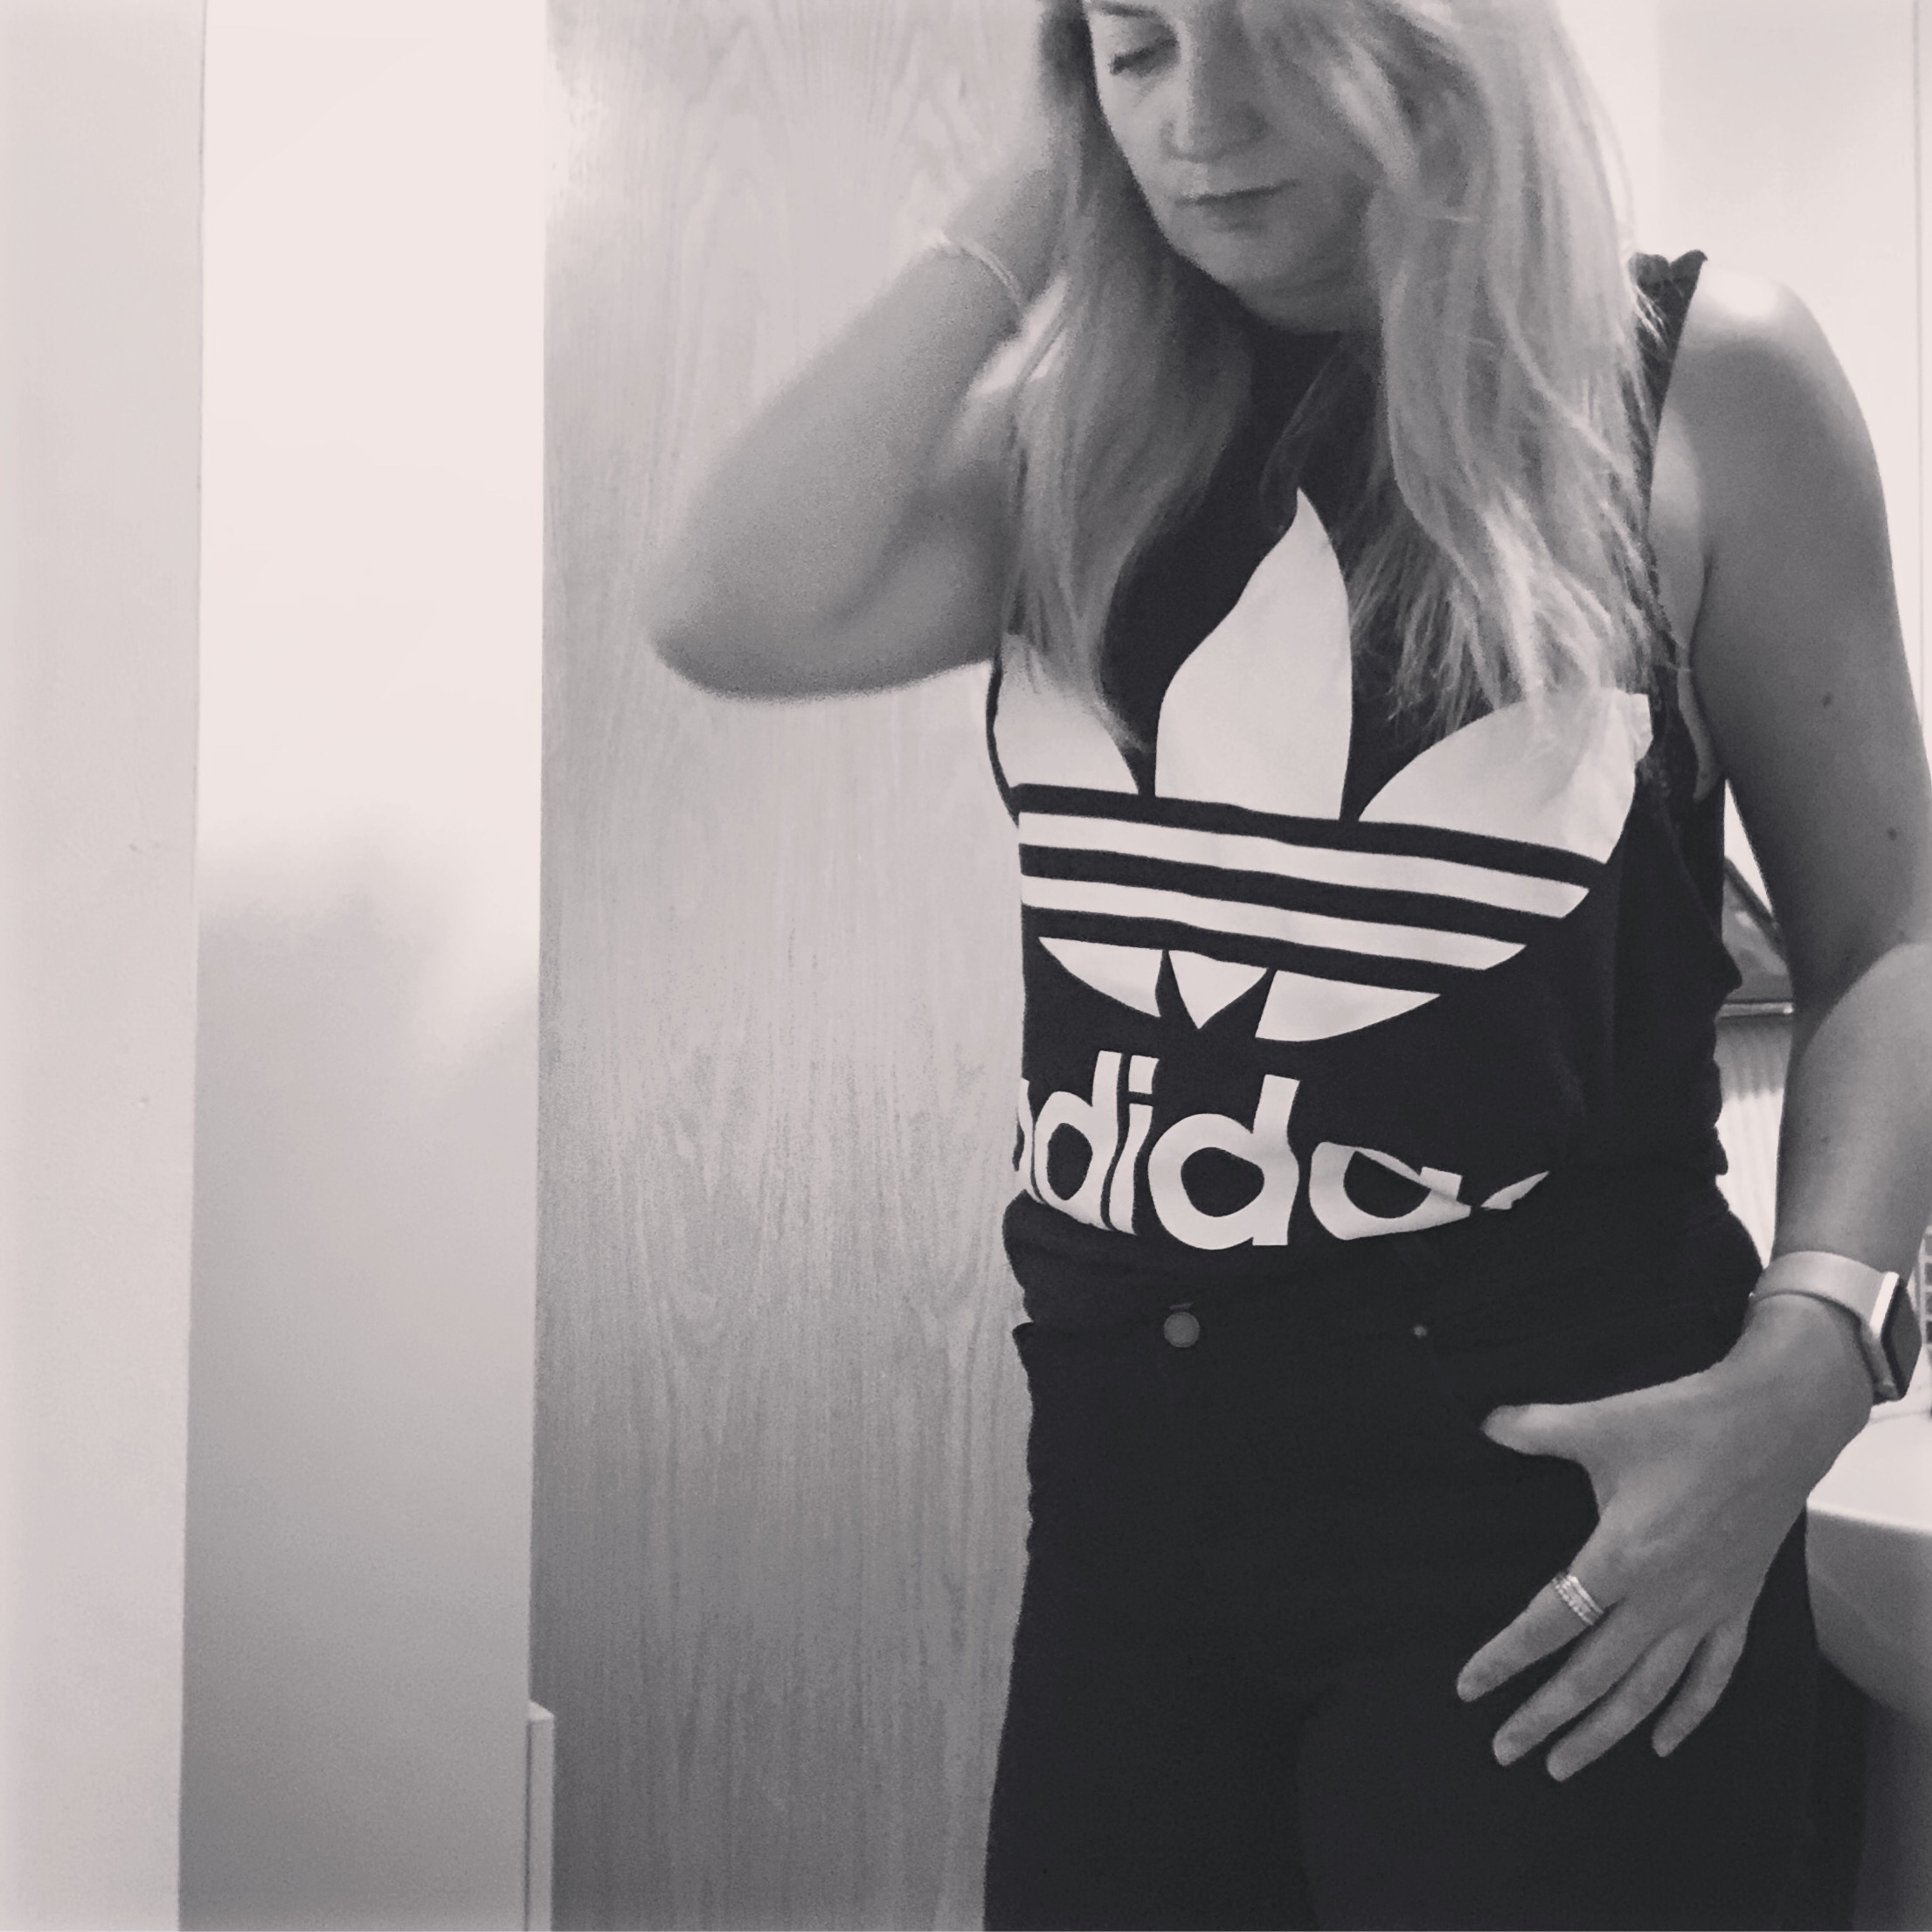 A picture of me posing wearing an Adidas tank top